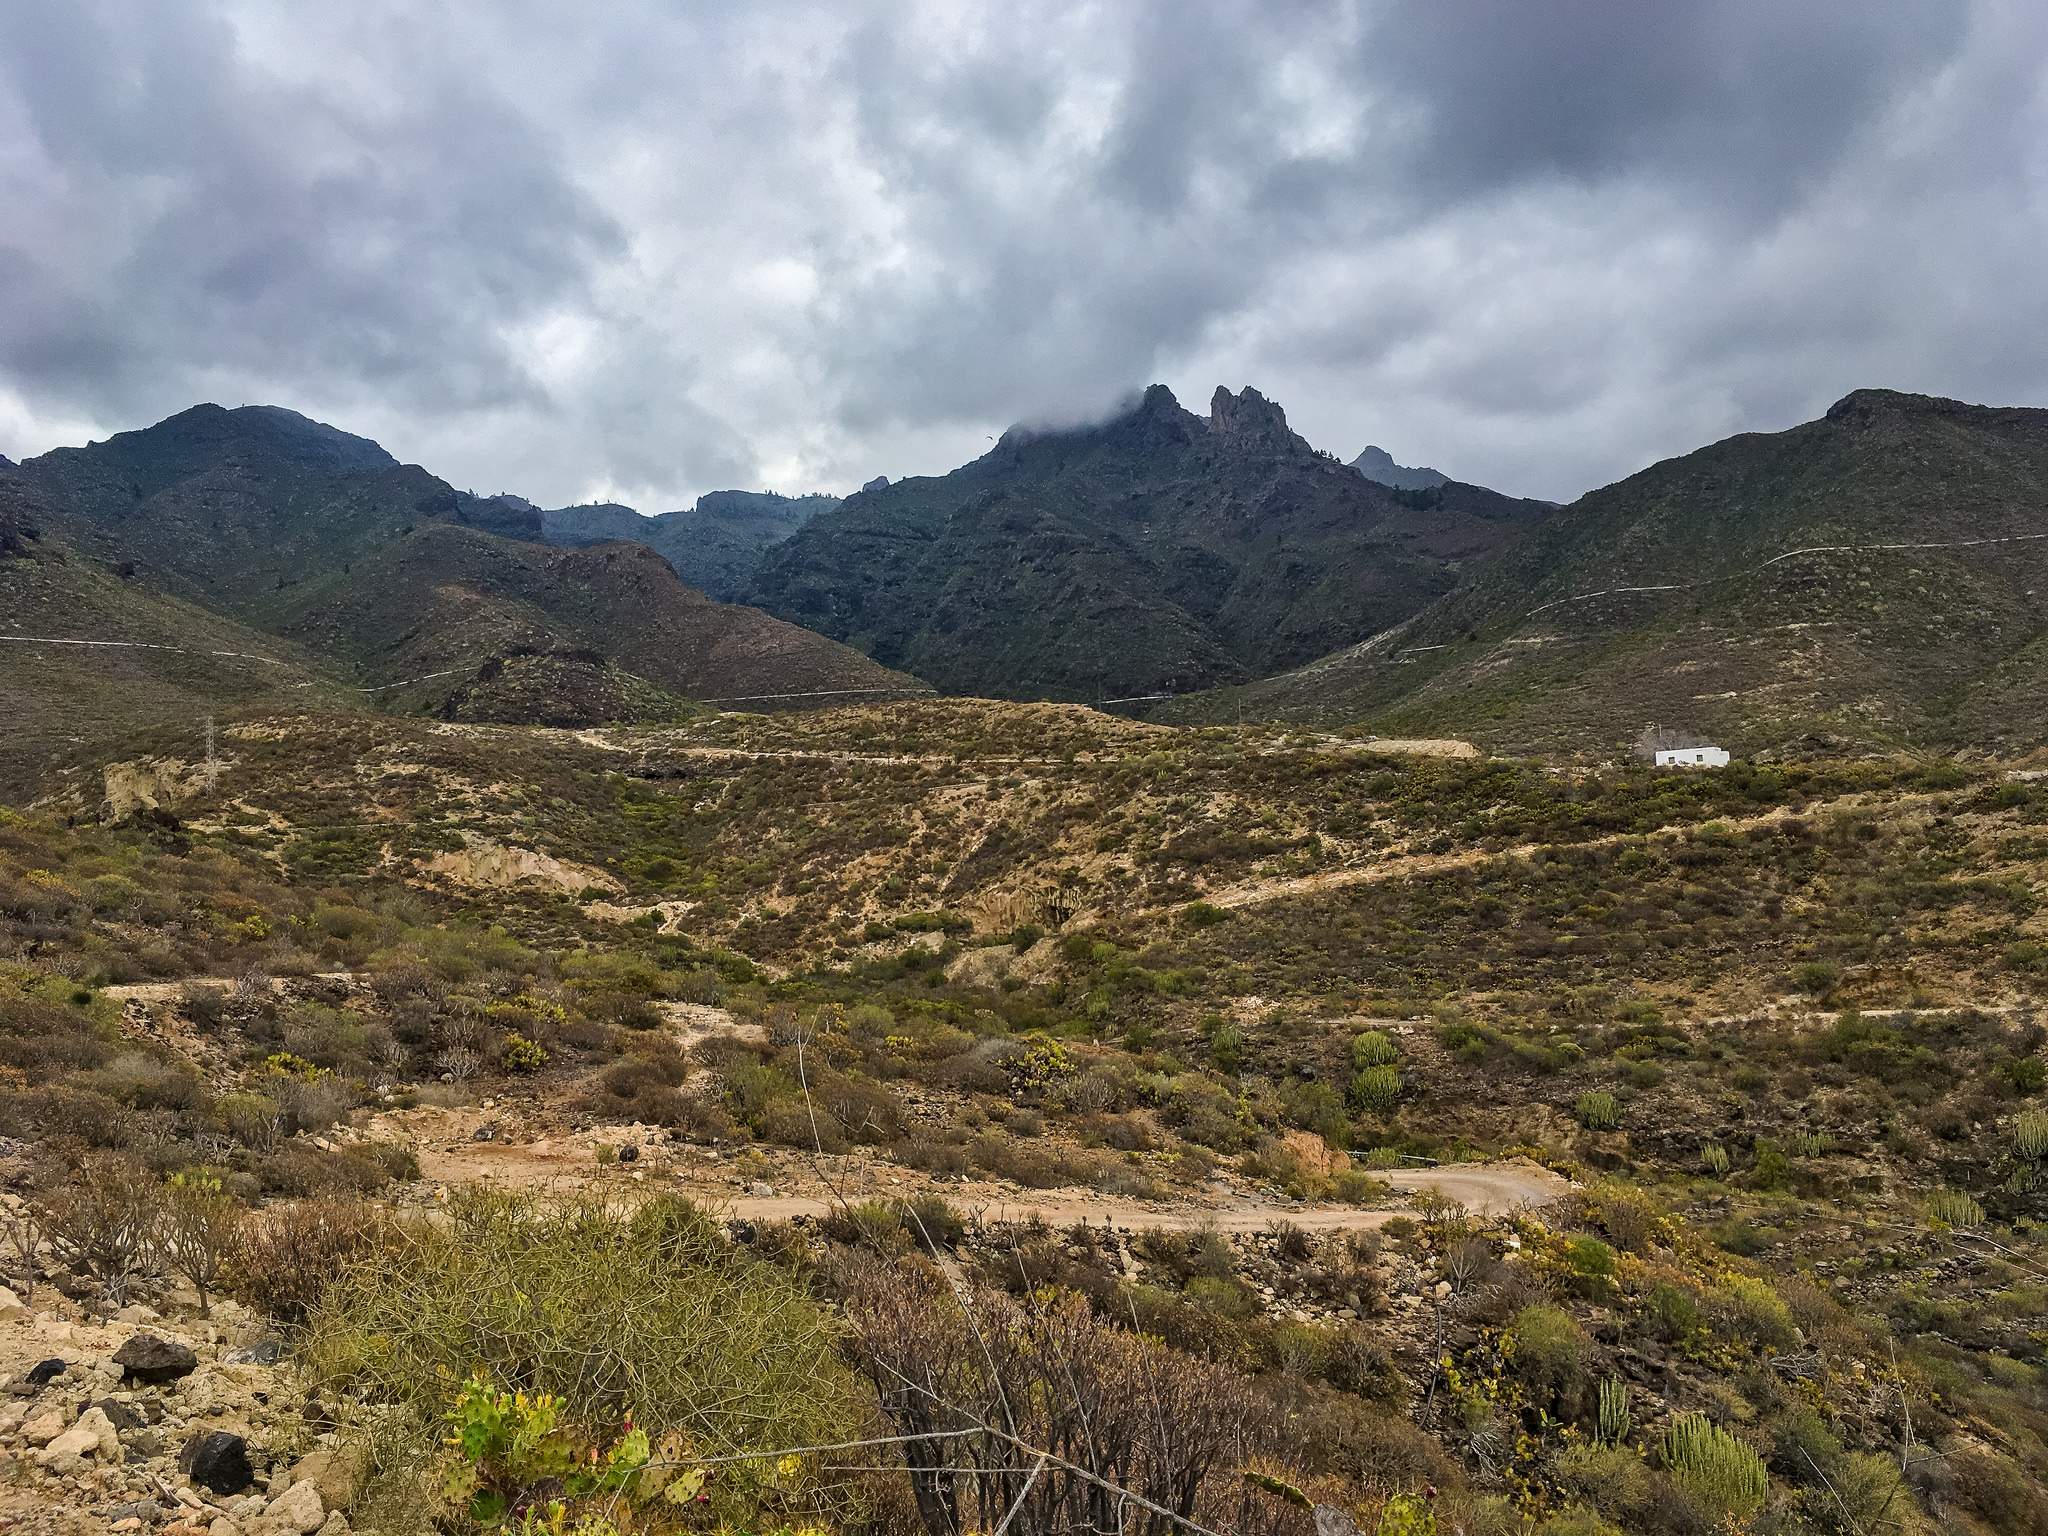 A wide look towards the paths and mountains of the Reserva Natural Especial del Barranco del Infierno, Tenerife.